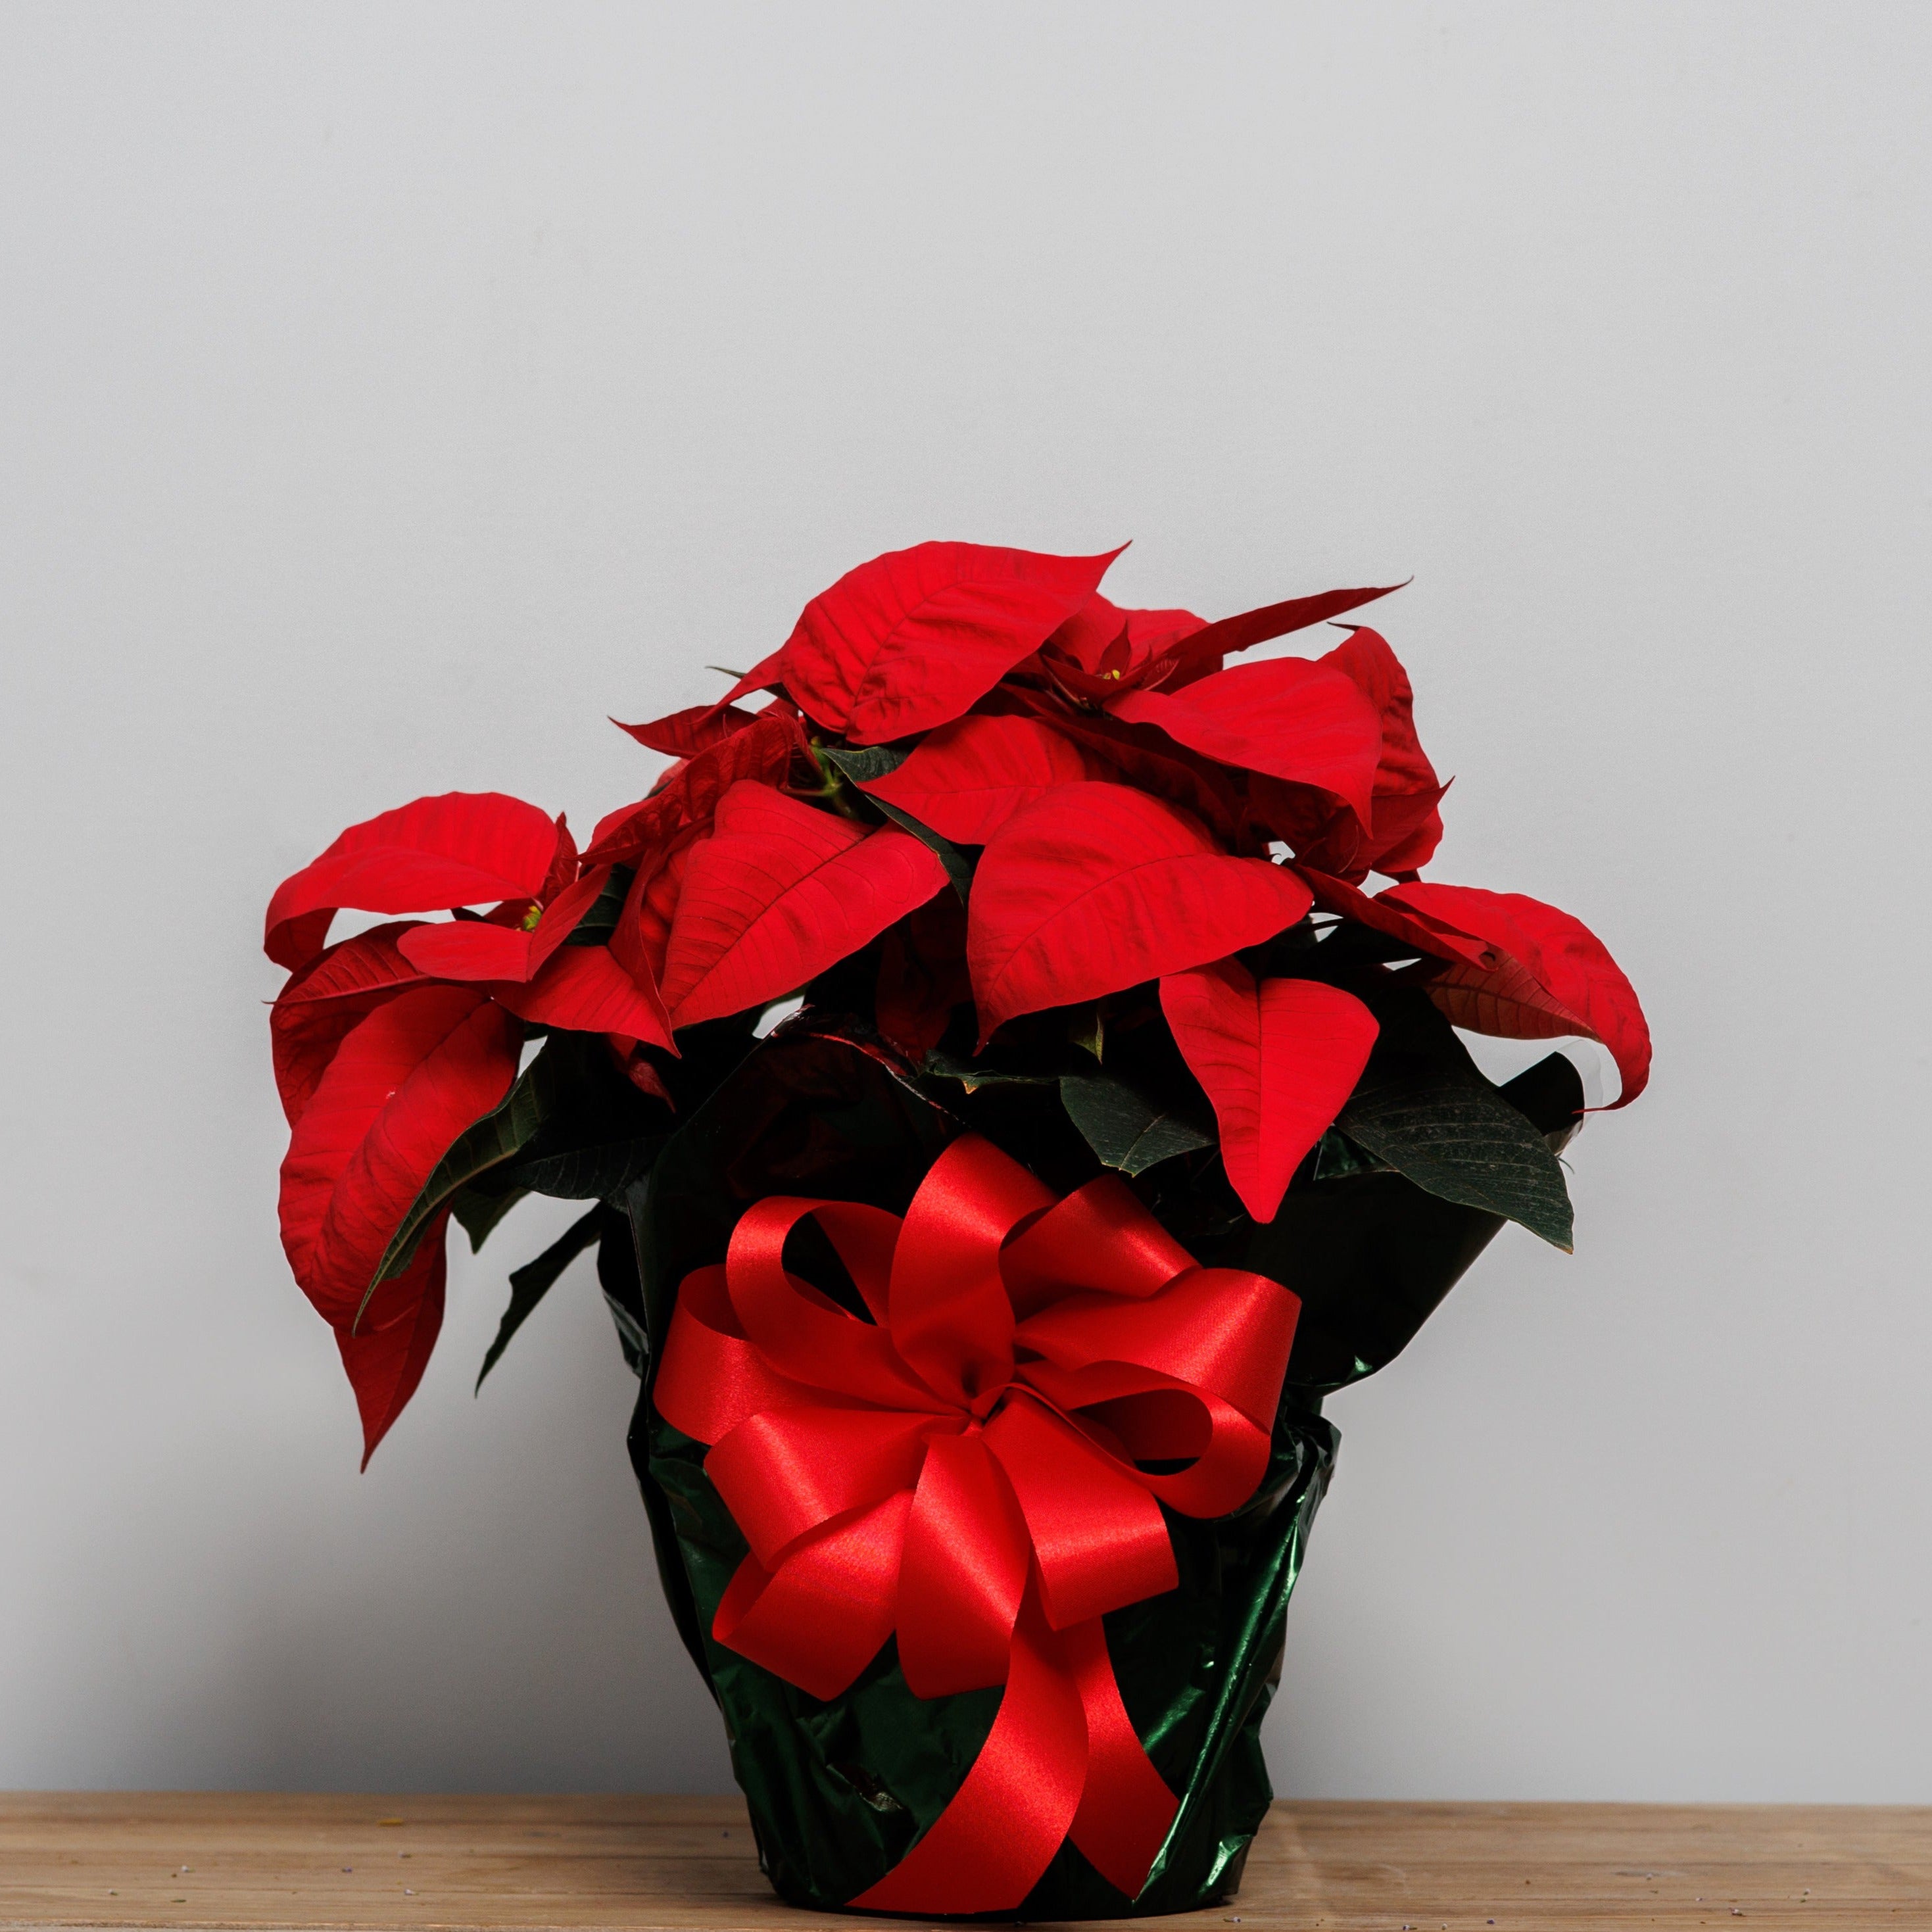 A red poinsettia wrapped in green foil with a red bow.